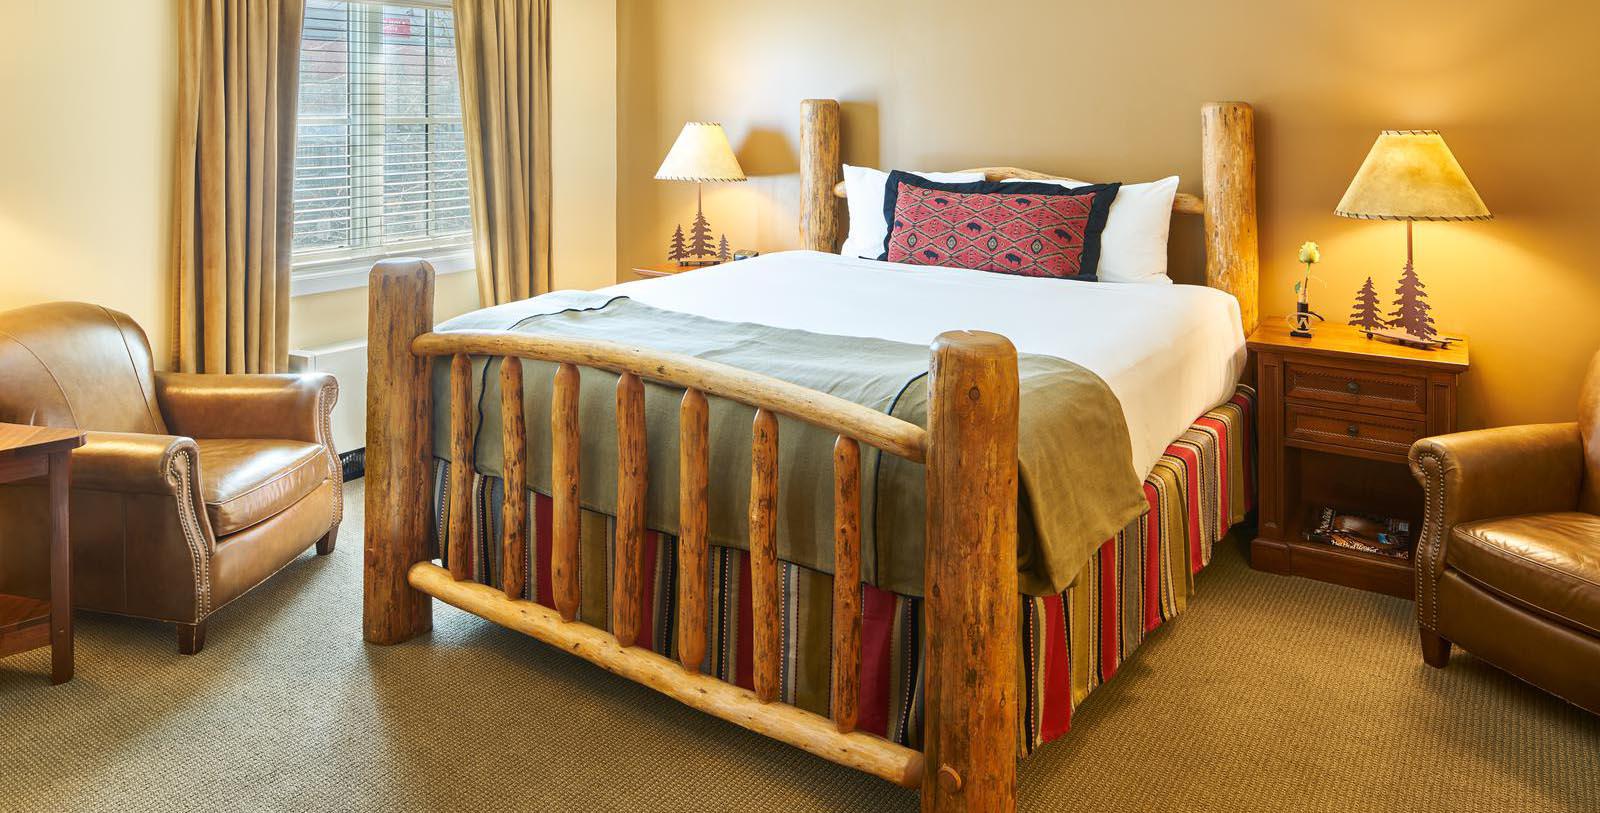 Image of Guestroom The Wort Hotel, 1941, Member of Historic Hotels of America, in Jackson, Wyoming,Accommodations